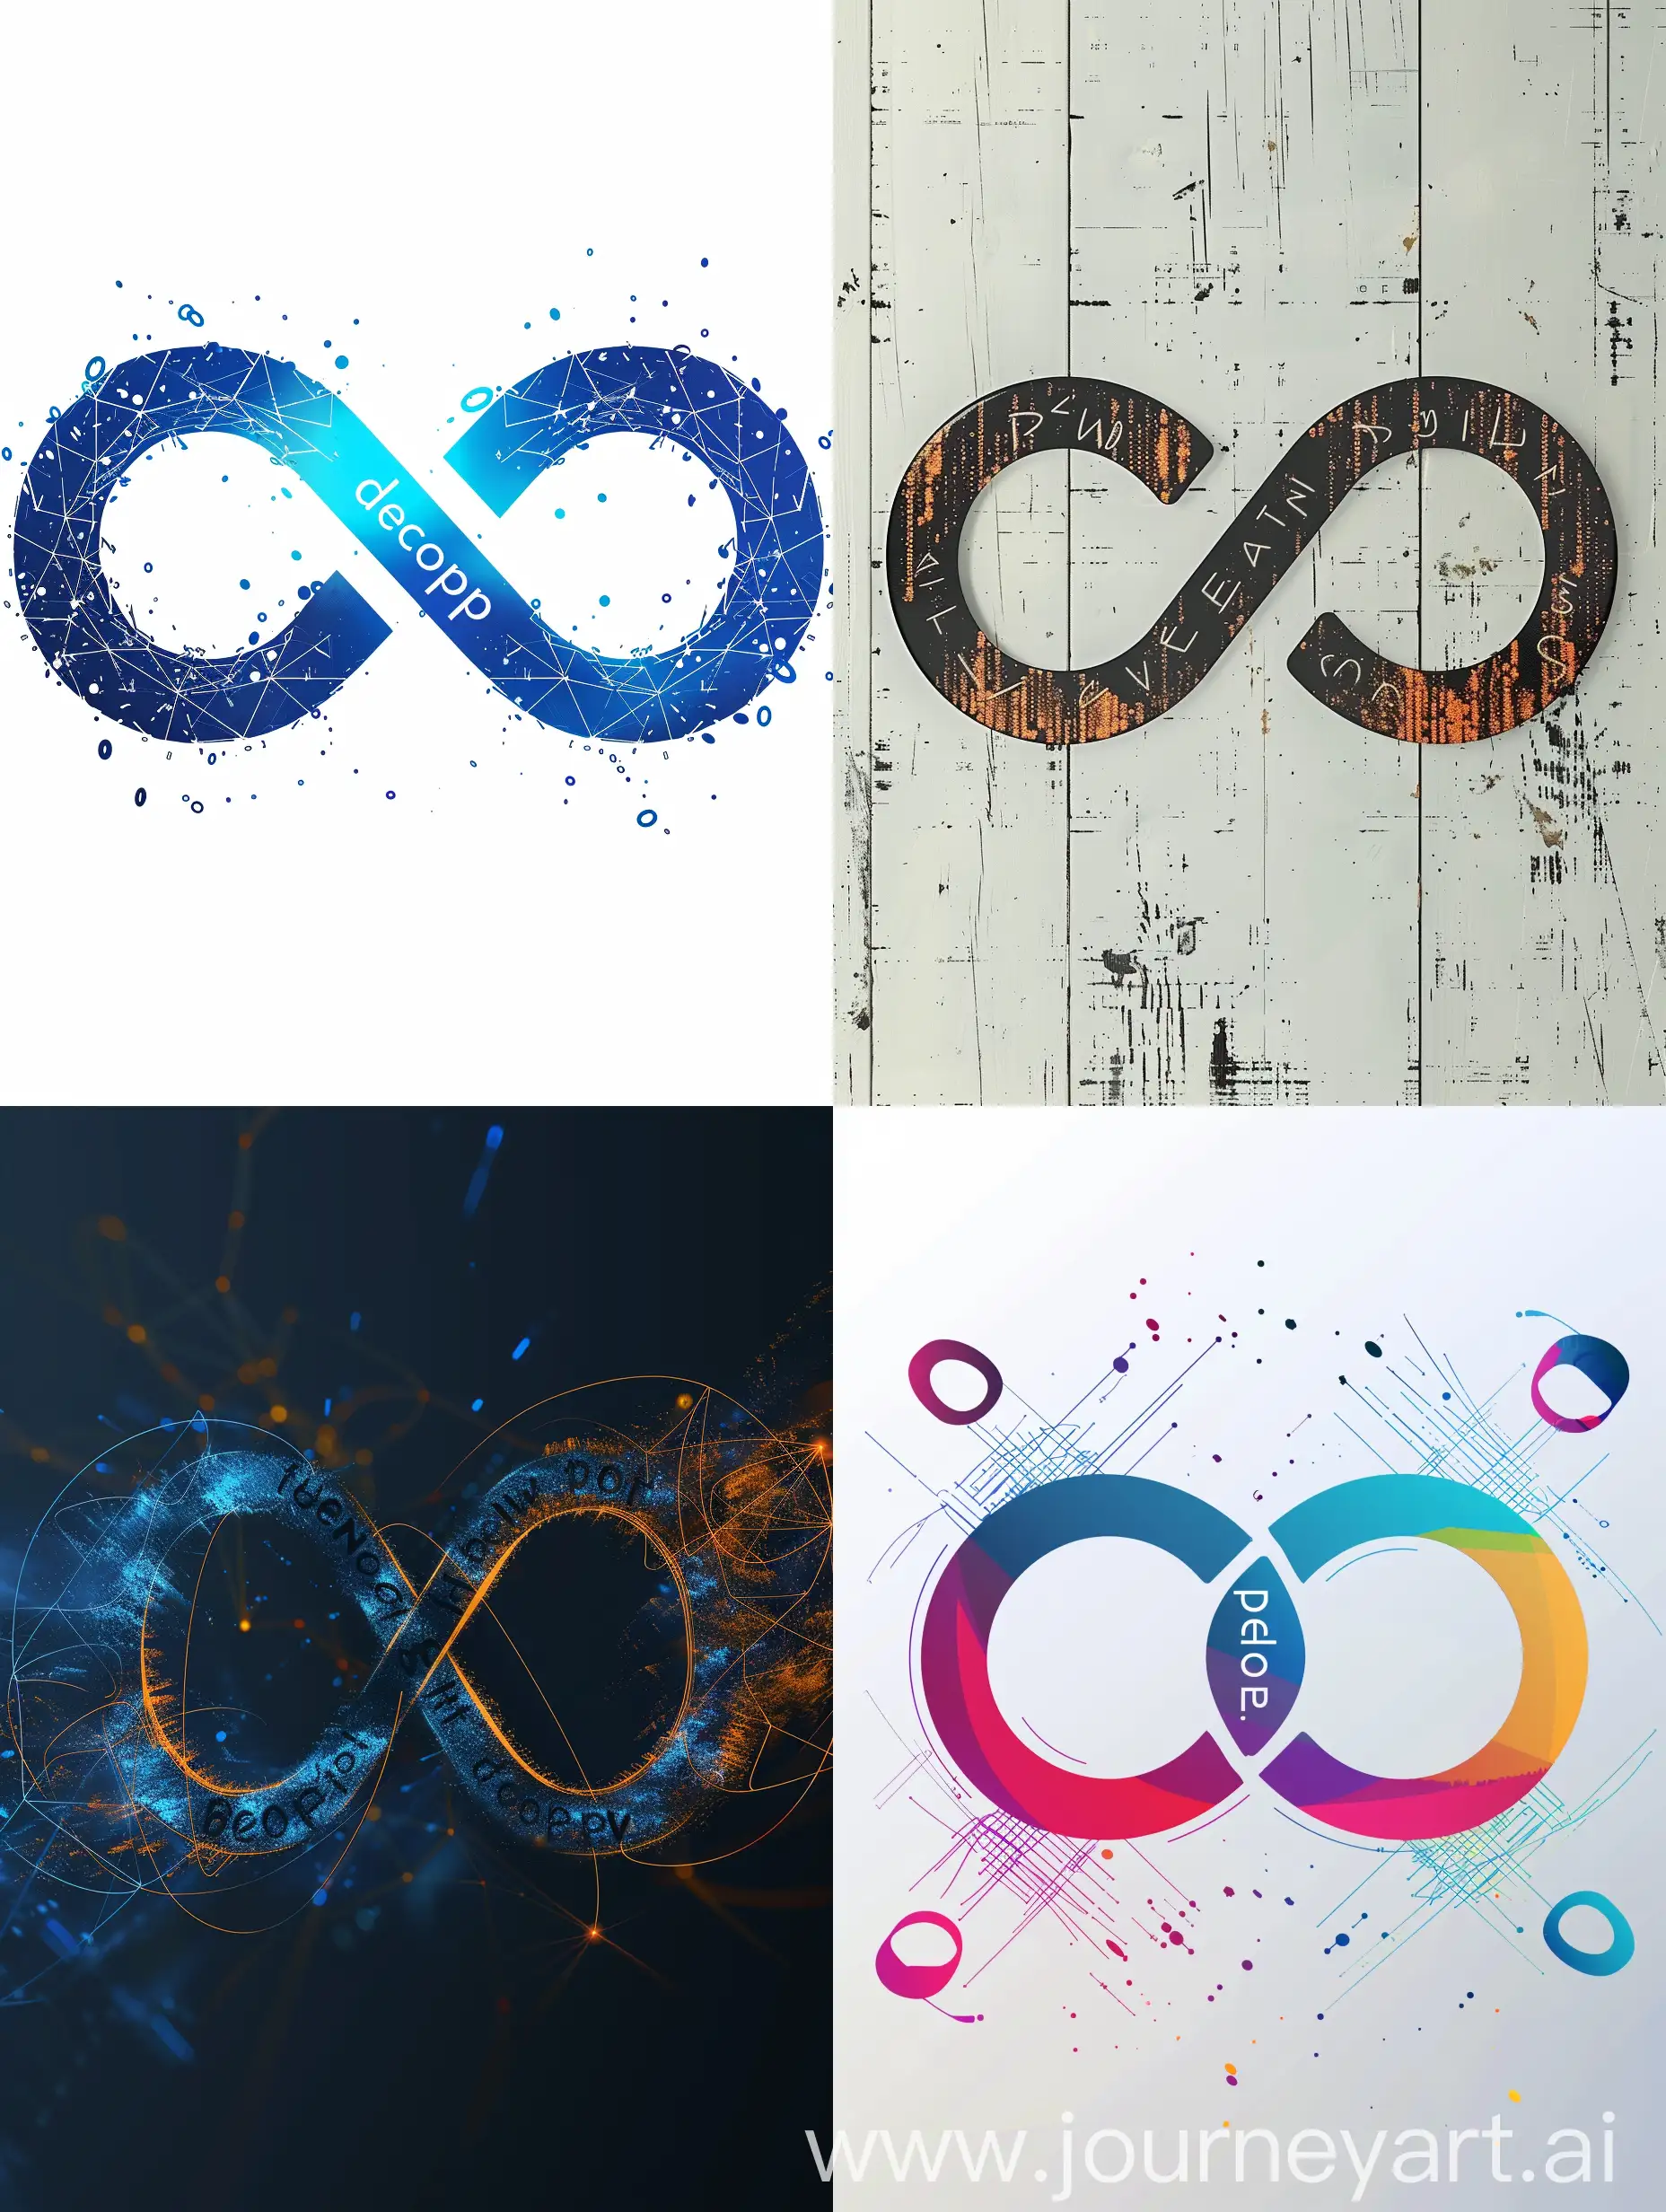 The devops inscription in the infinity sign